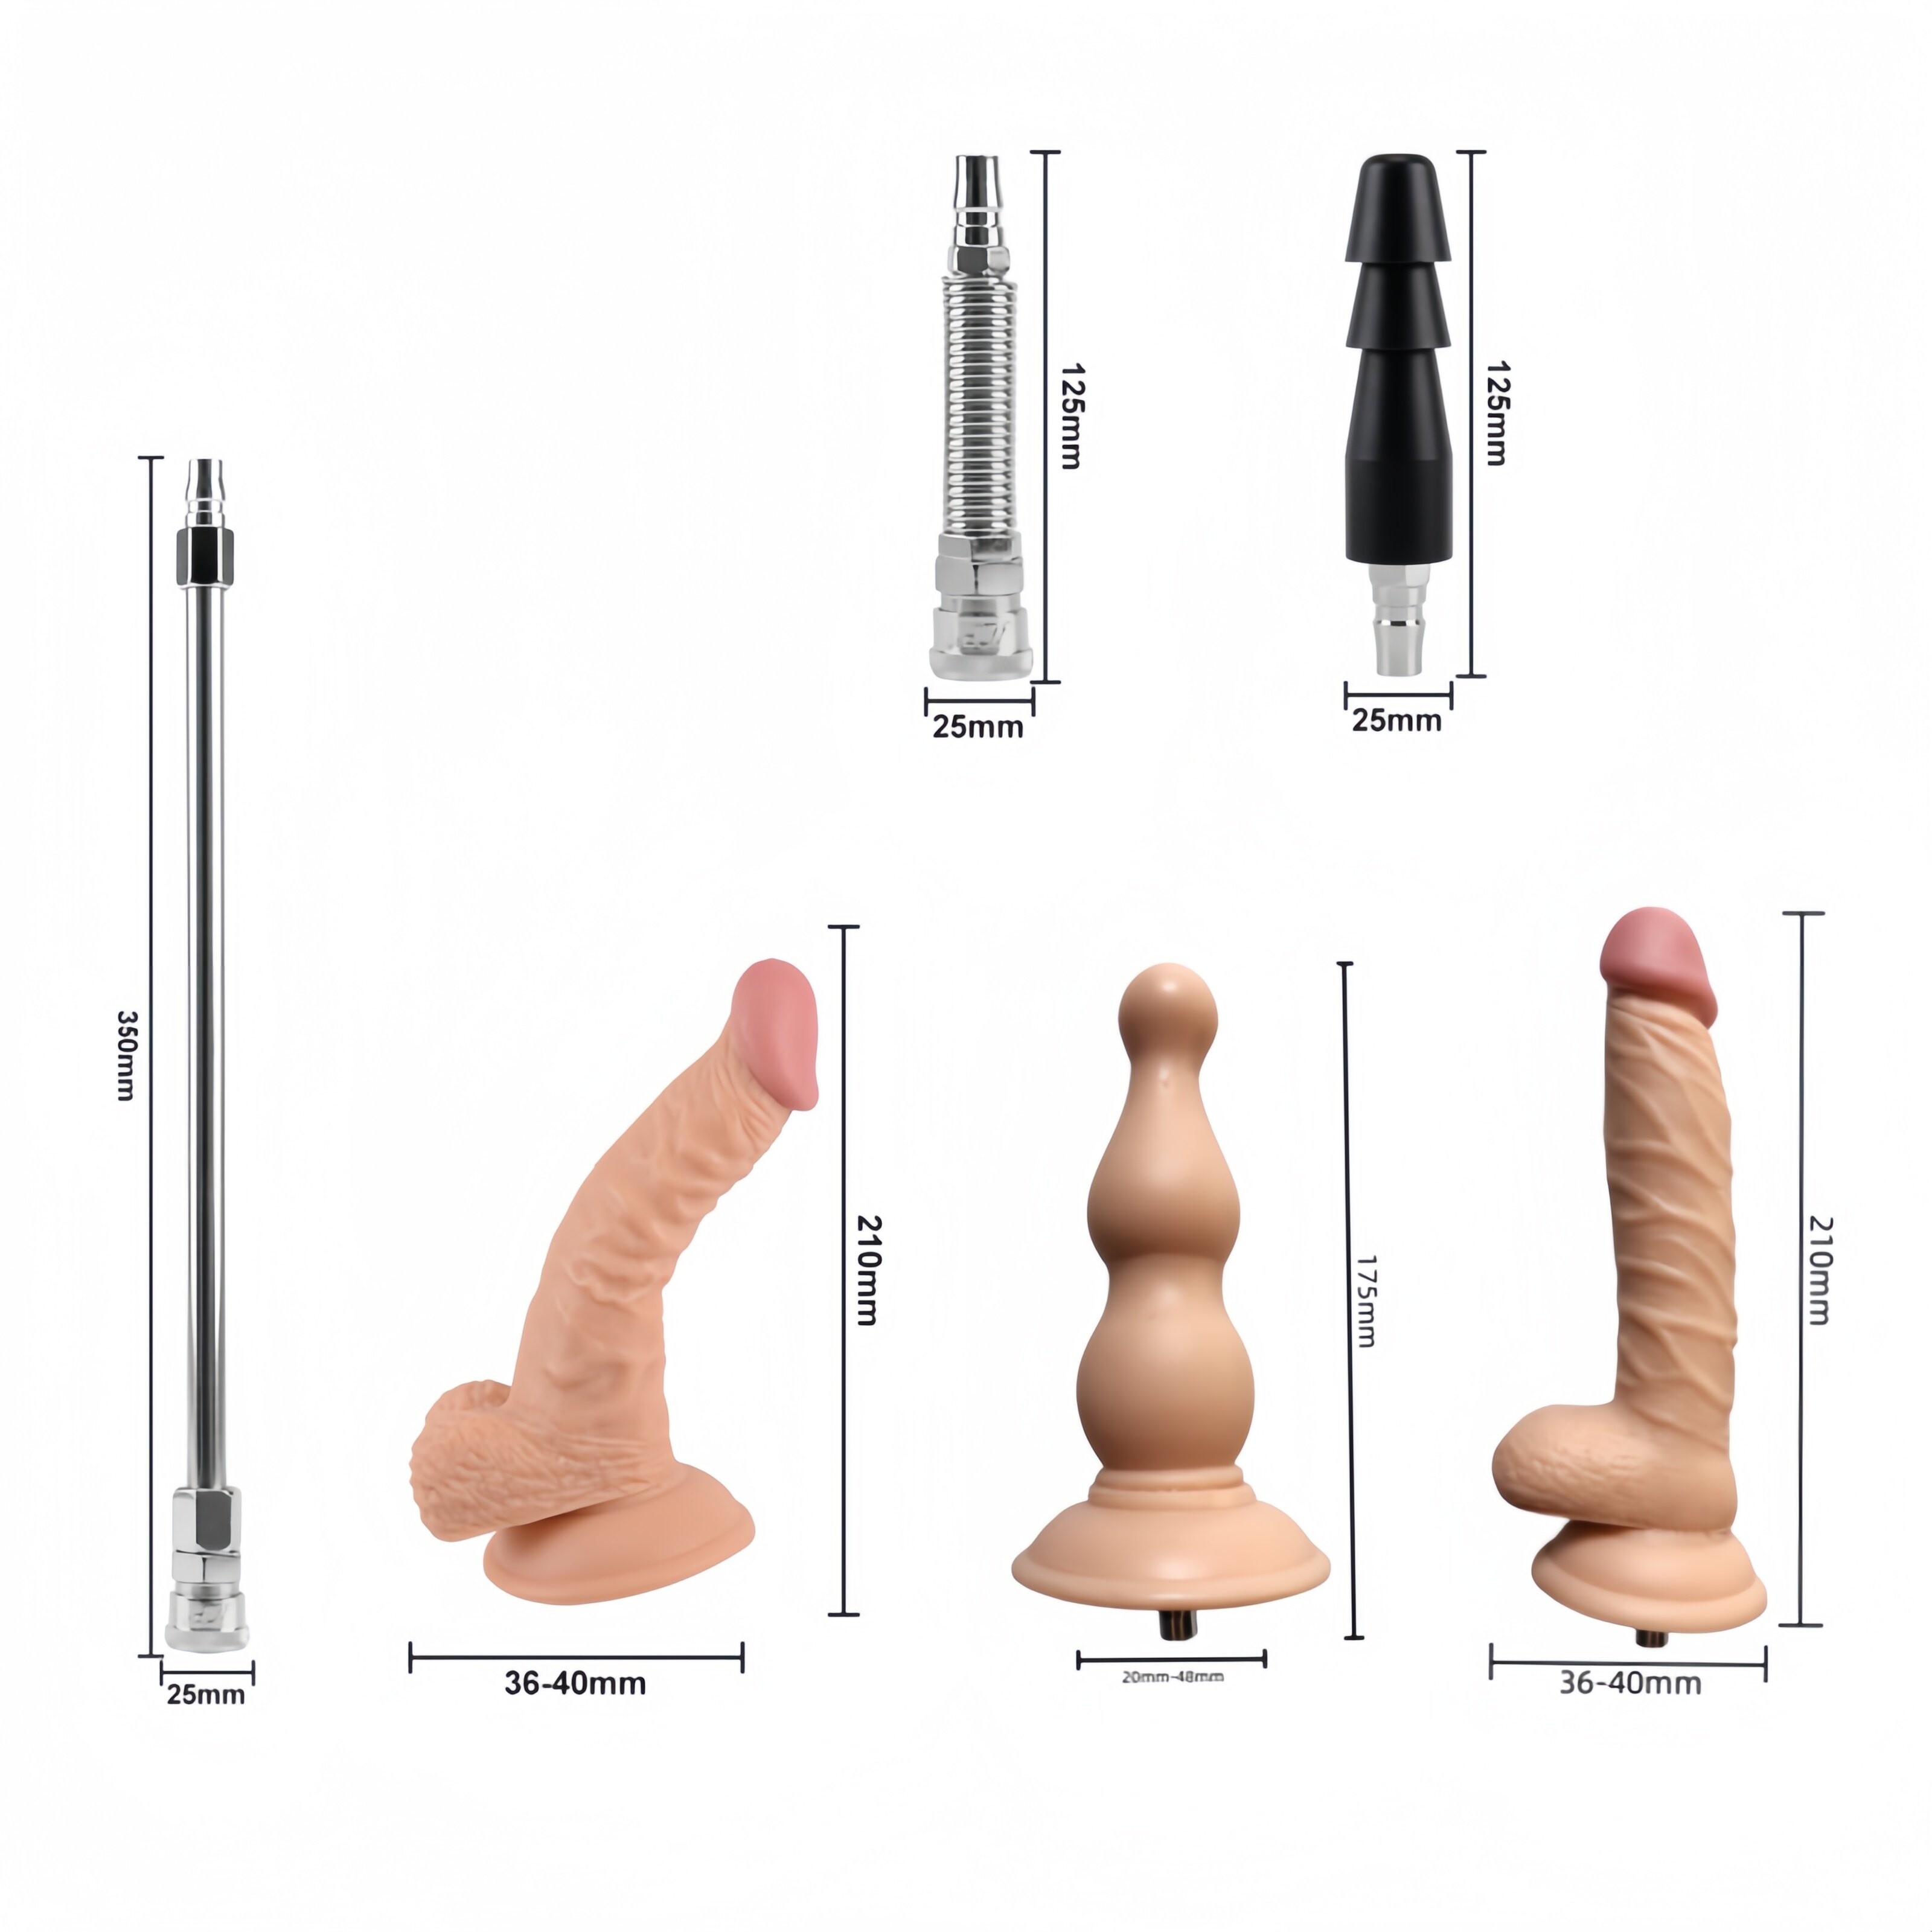 Sex Machine 120W 90 Angle Adjustable with Six Dildos Attachments for Women